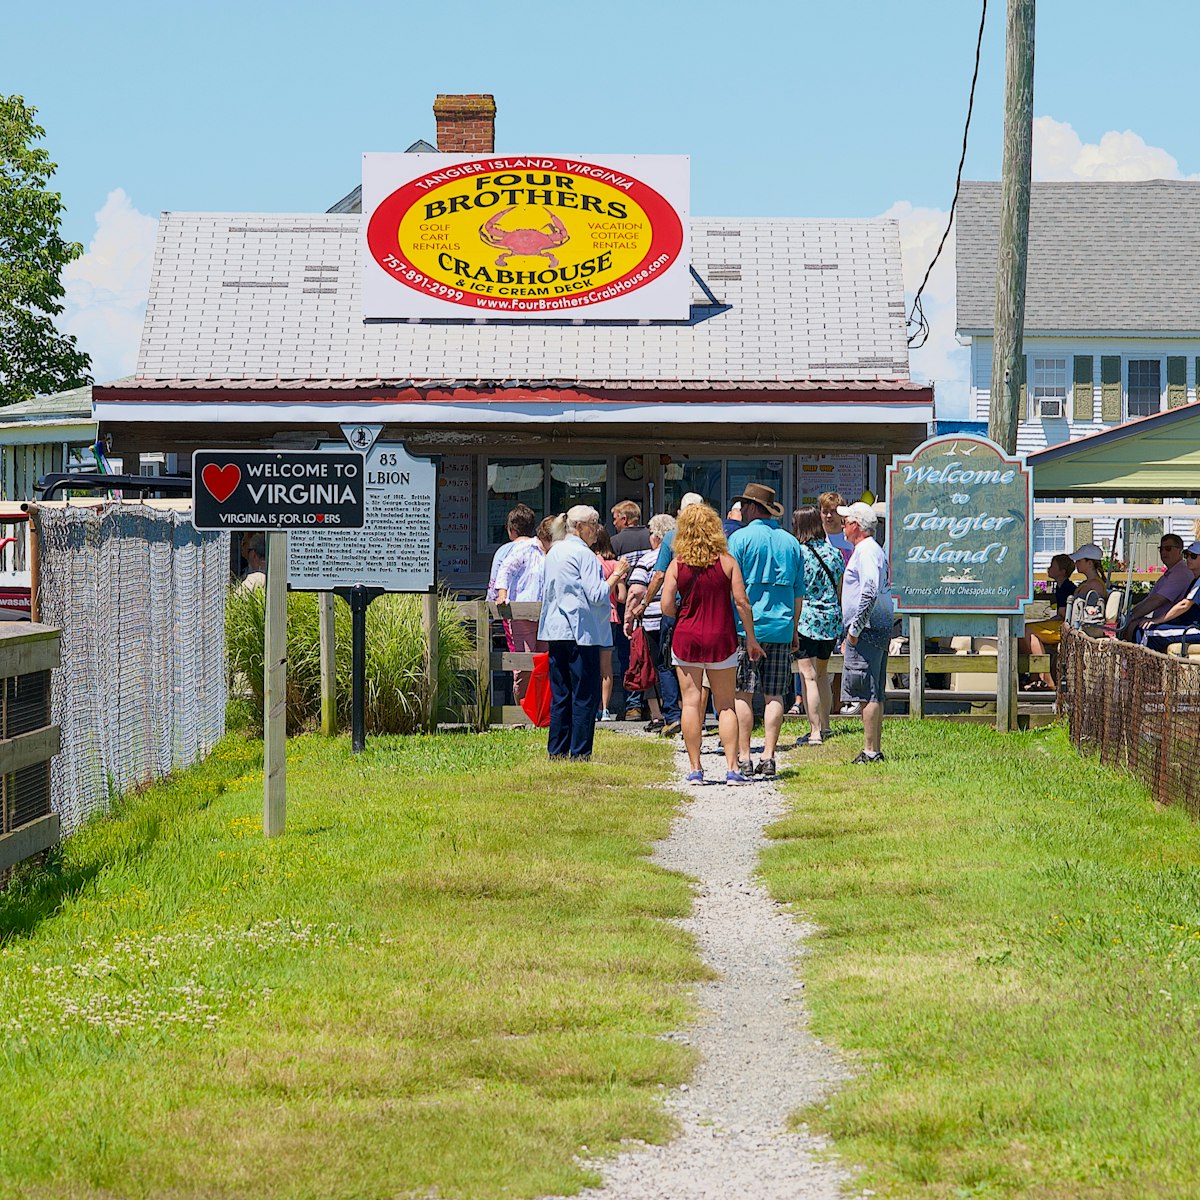 Visitors walk past the “Welcome to Virginia” and “Welcome to Tangier Island!” signs on their way to Main Street on Tangier Island.